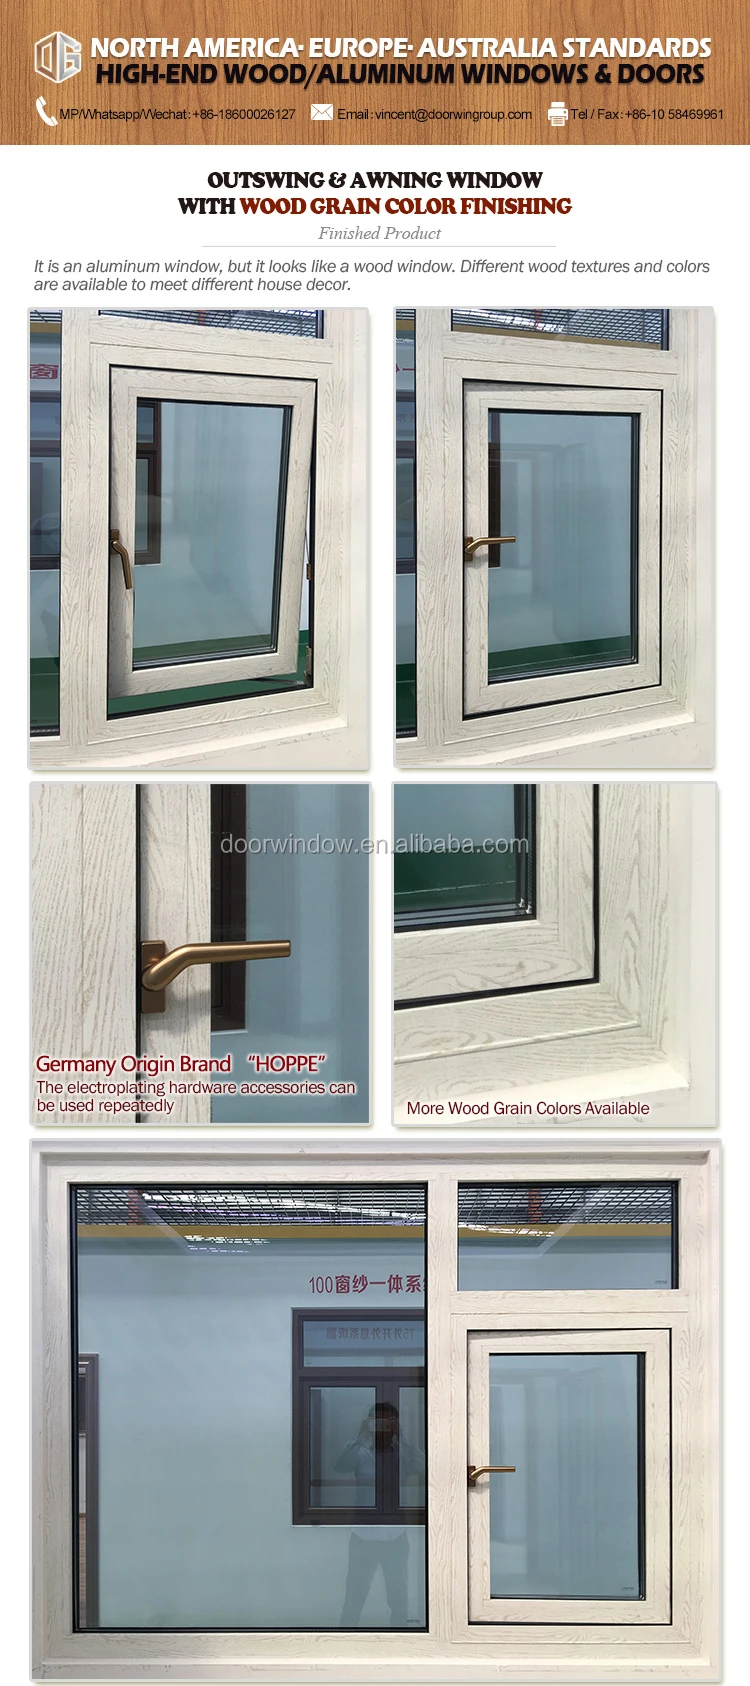 Factory outlet cottage pane window frames casement windows convert fixed to opening